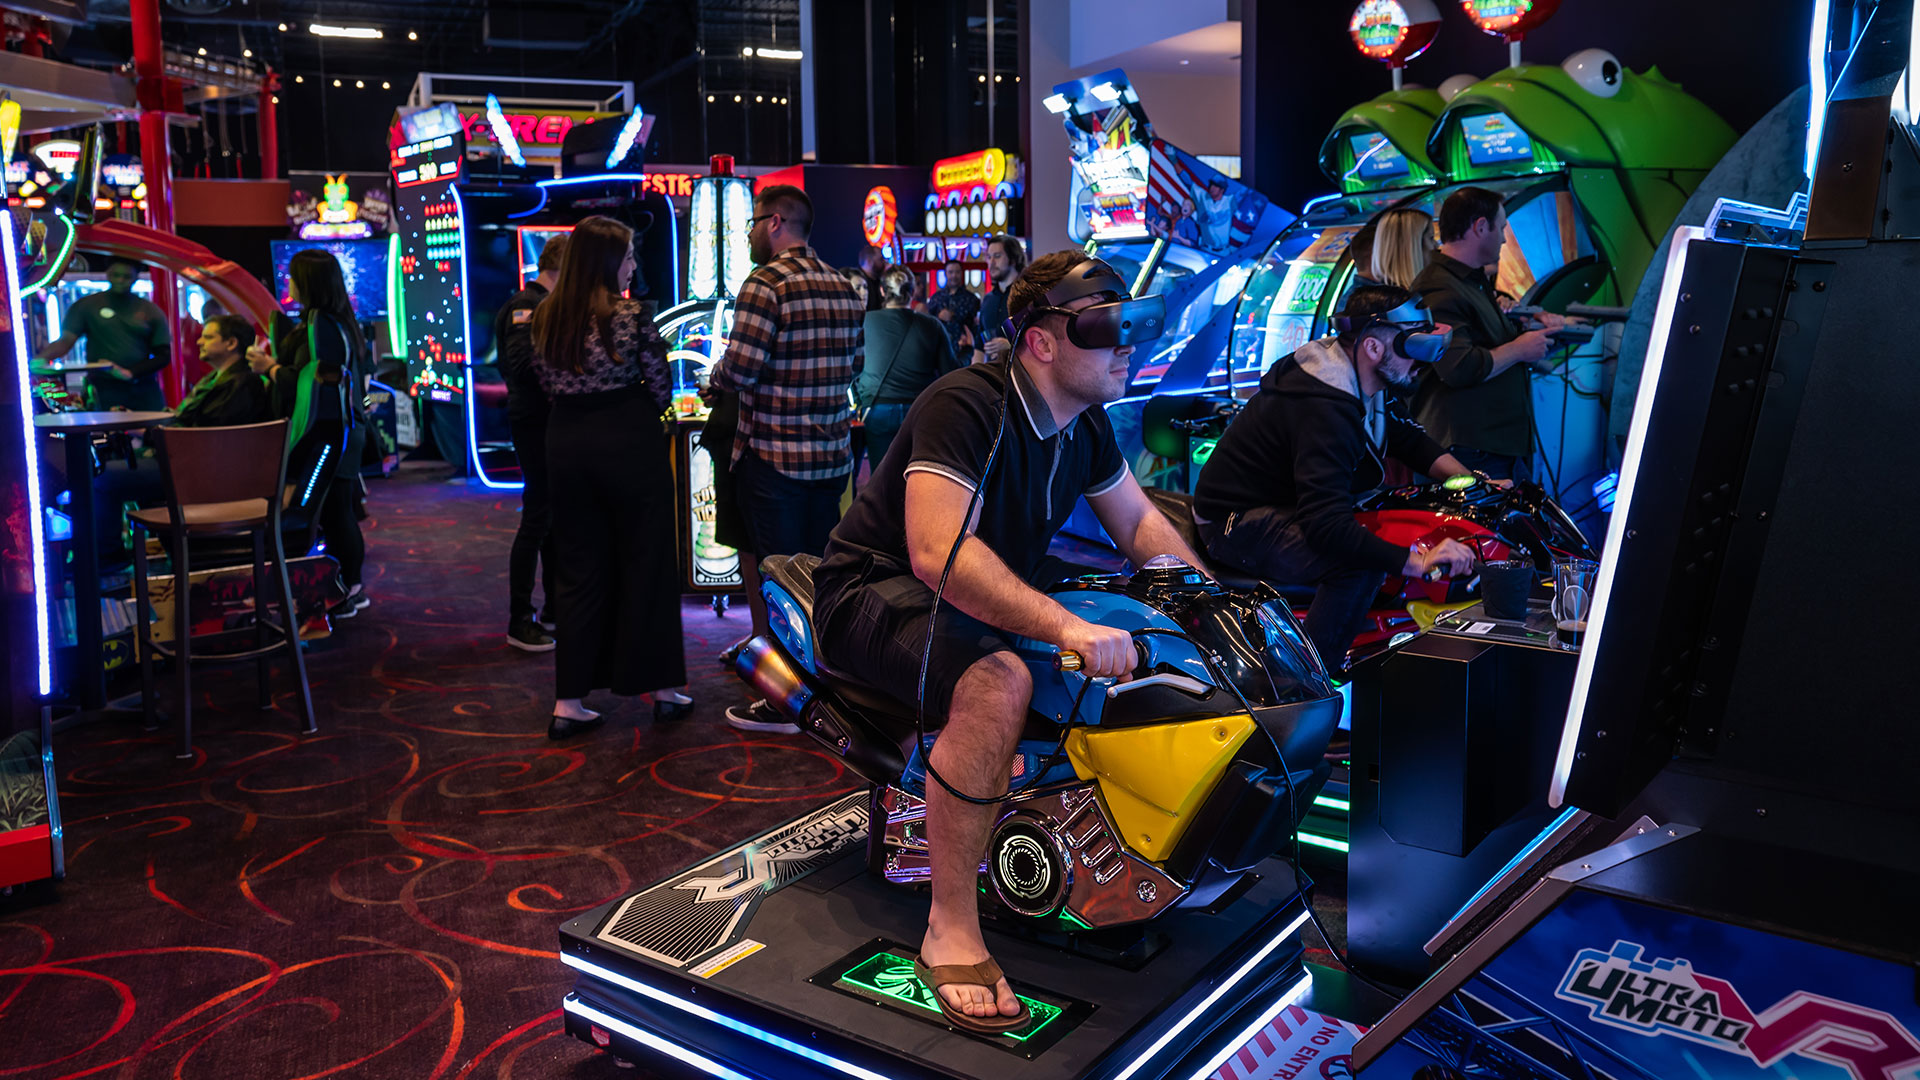 Arcade Video Games for the Whole Family to Enjoy Dallas, Austin | PINSTACK